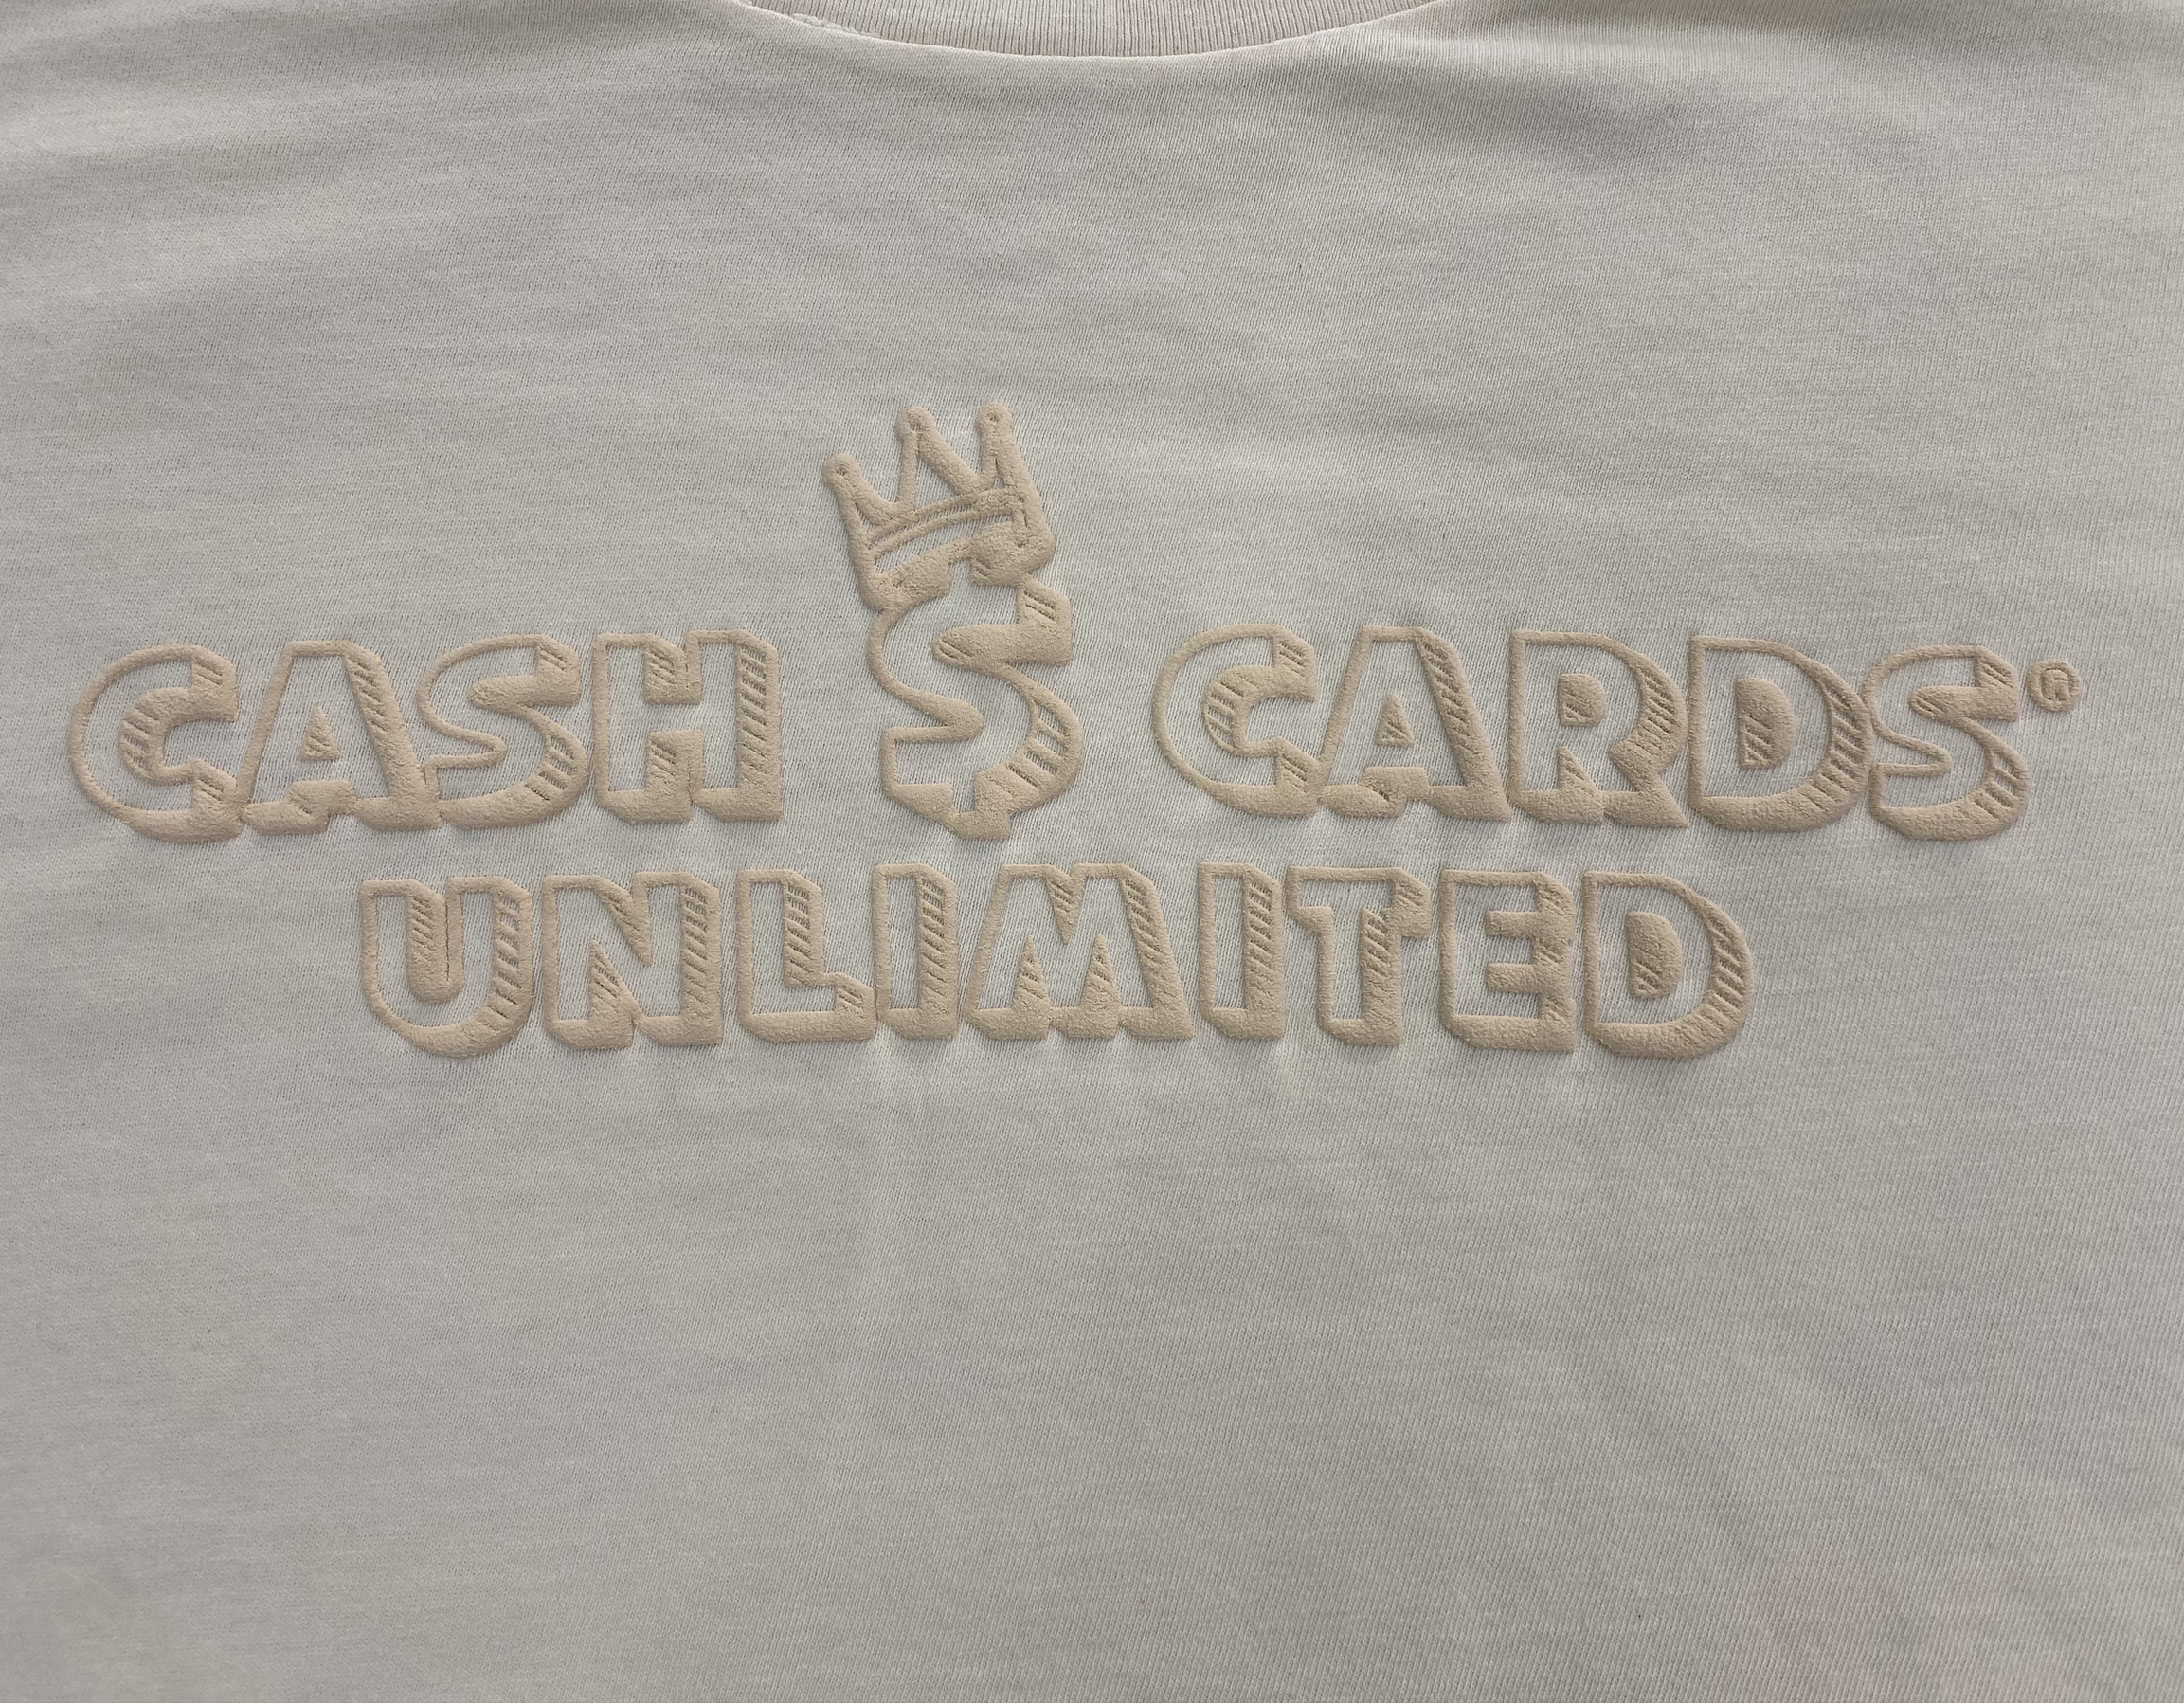 Cash Cards Unlimited Street Wear T-Shirt (Off-White/2XL)